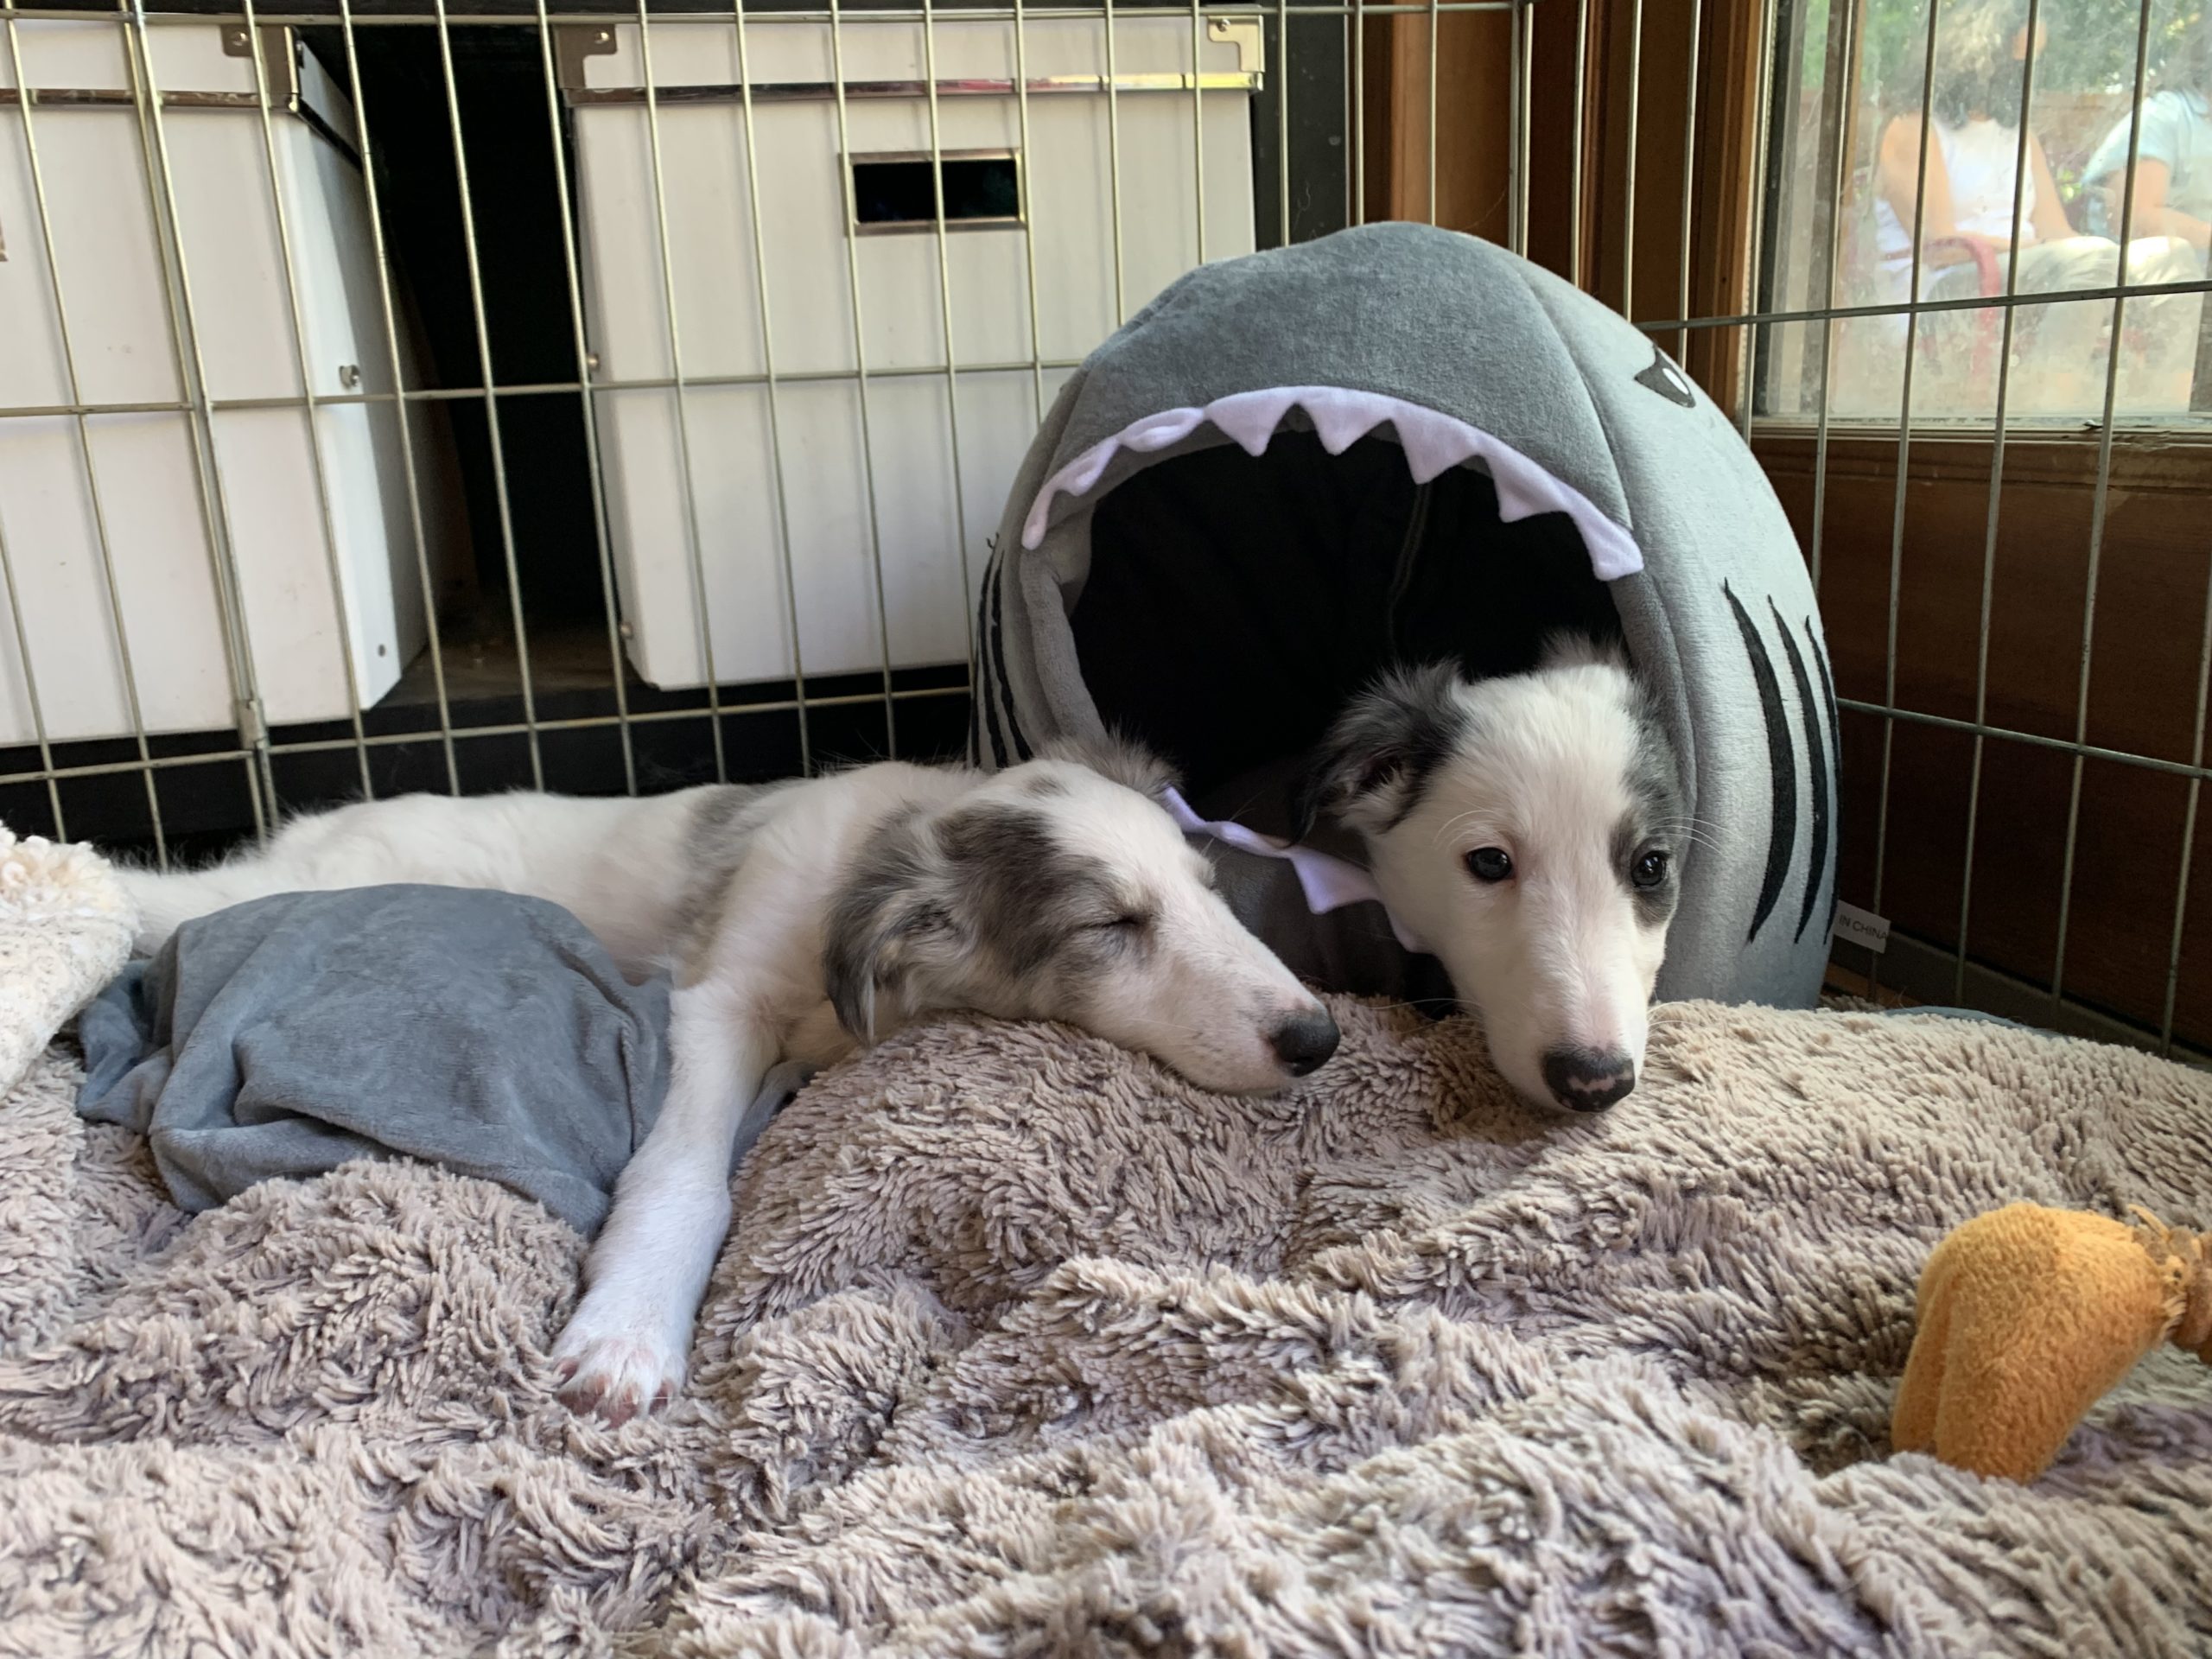 Two Talisman puppies sleeping. One is in a shark bed. Photo credit: Joyce Chin